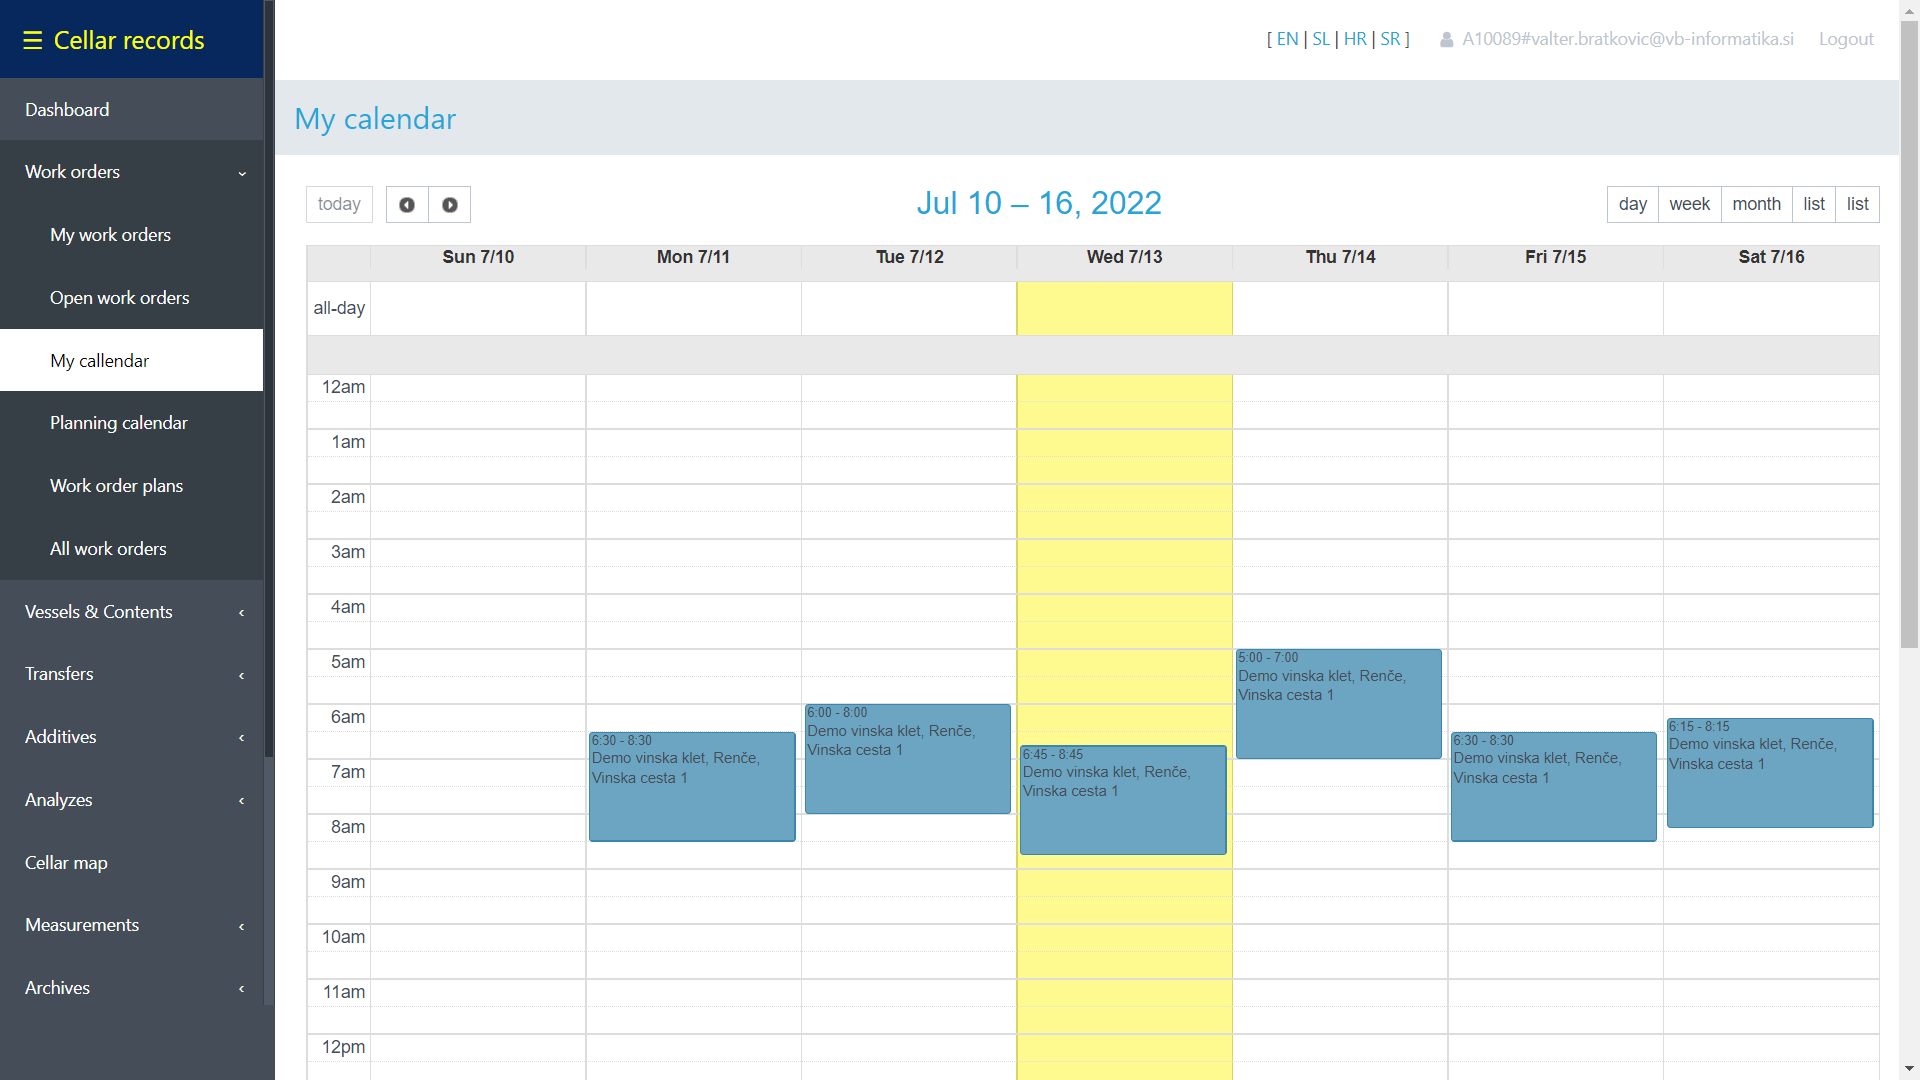 Display of work assignments in the work calendar.